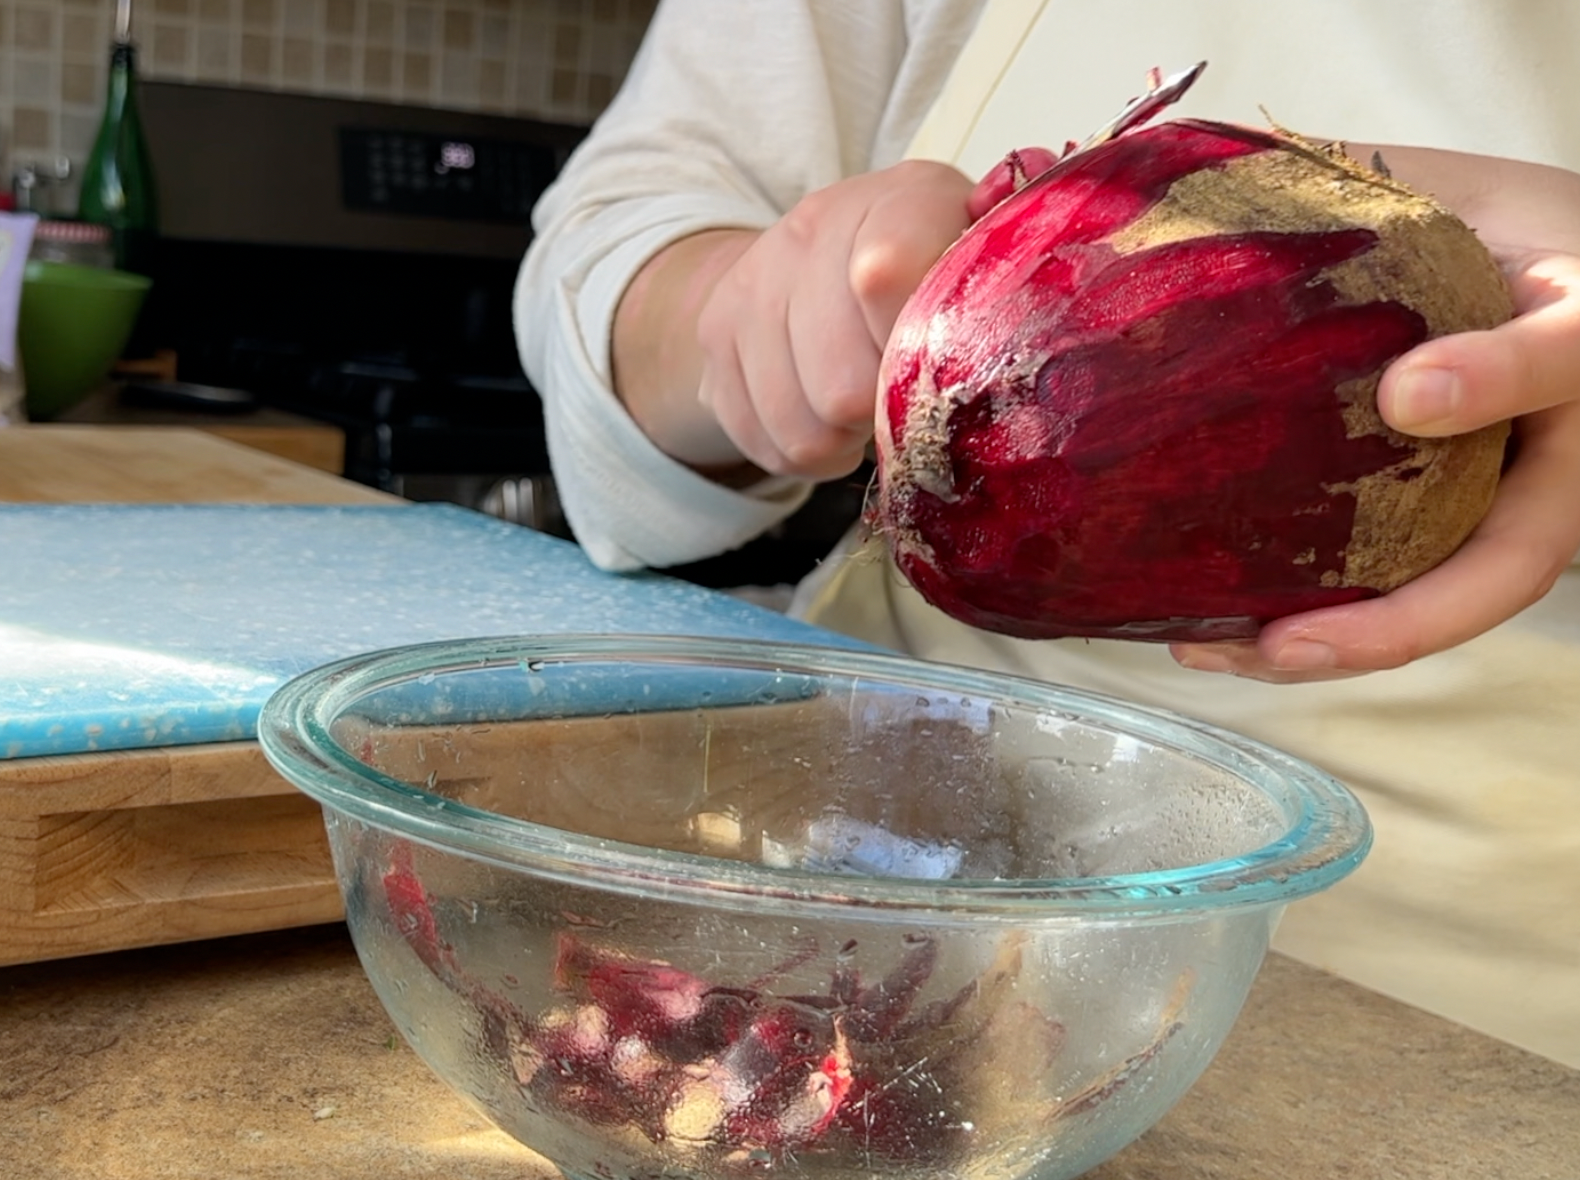 Peeling a giant beet with a vegetable peeler